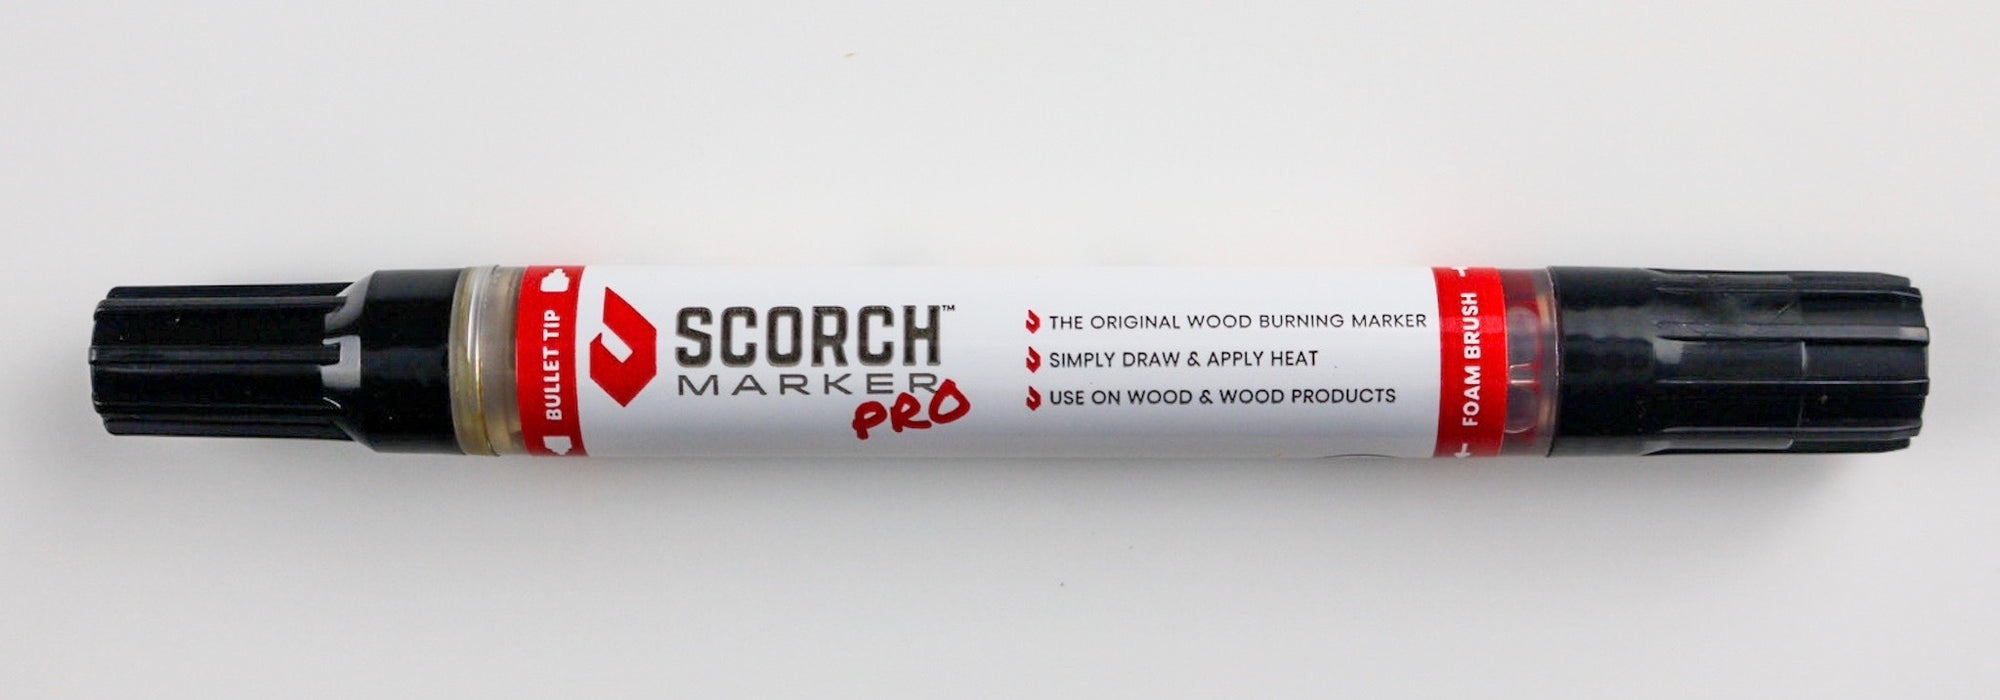 What's the Difference Between Scorch Marker and the Scorch Marker Pro?